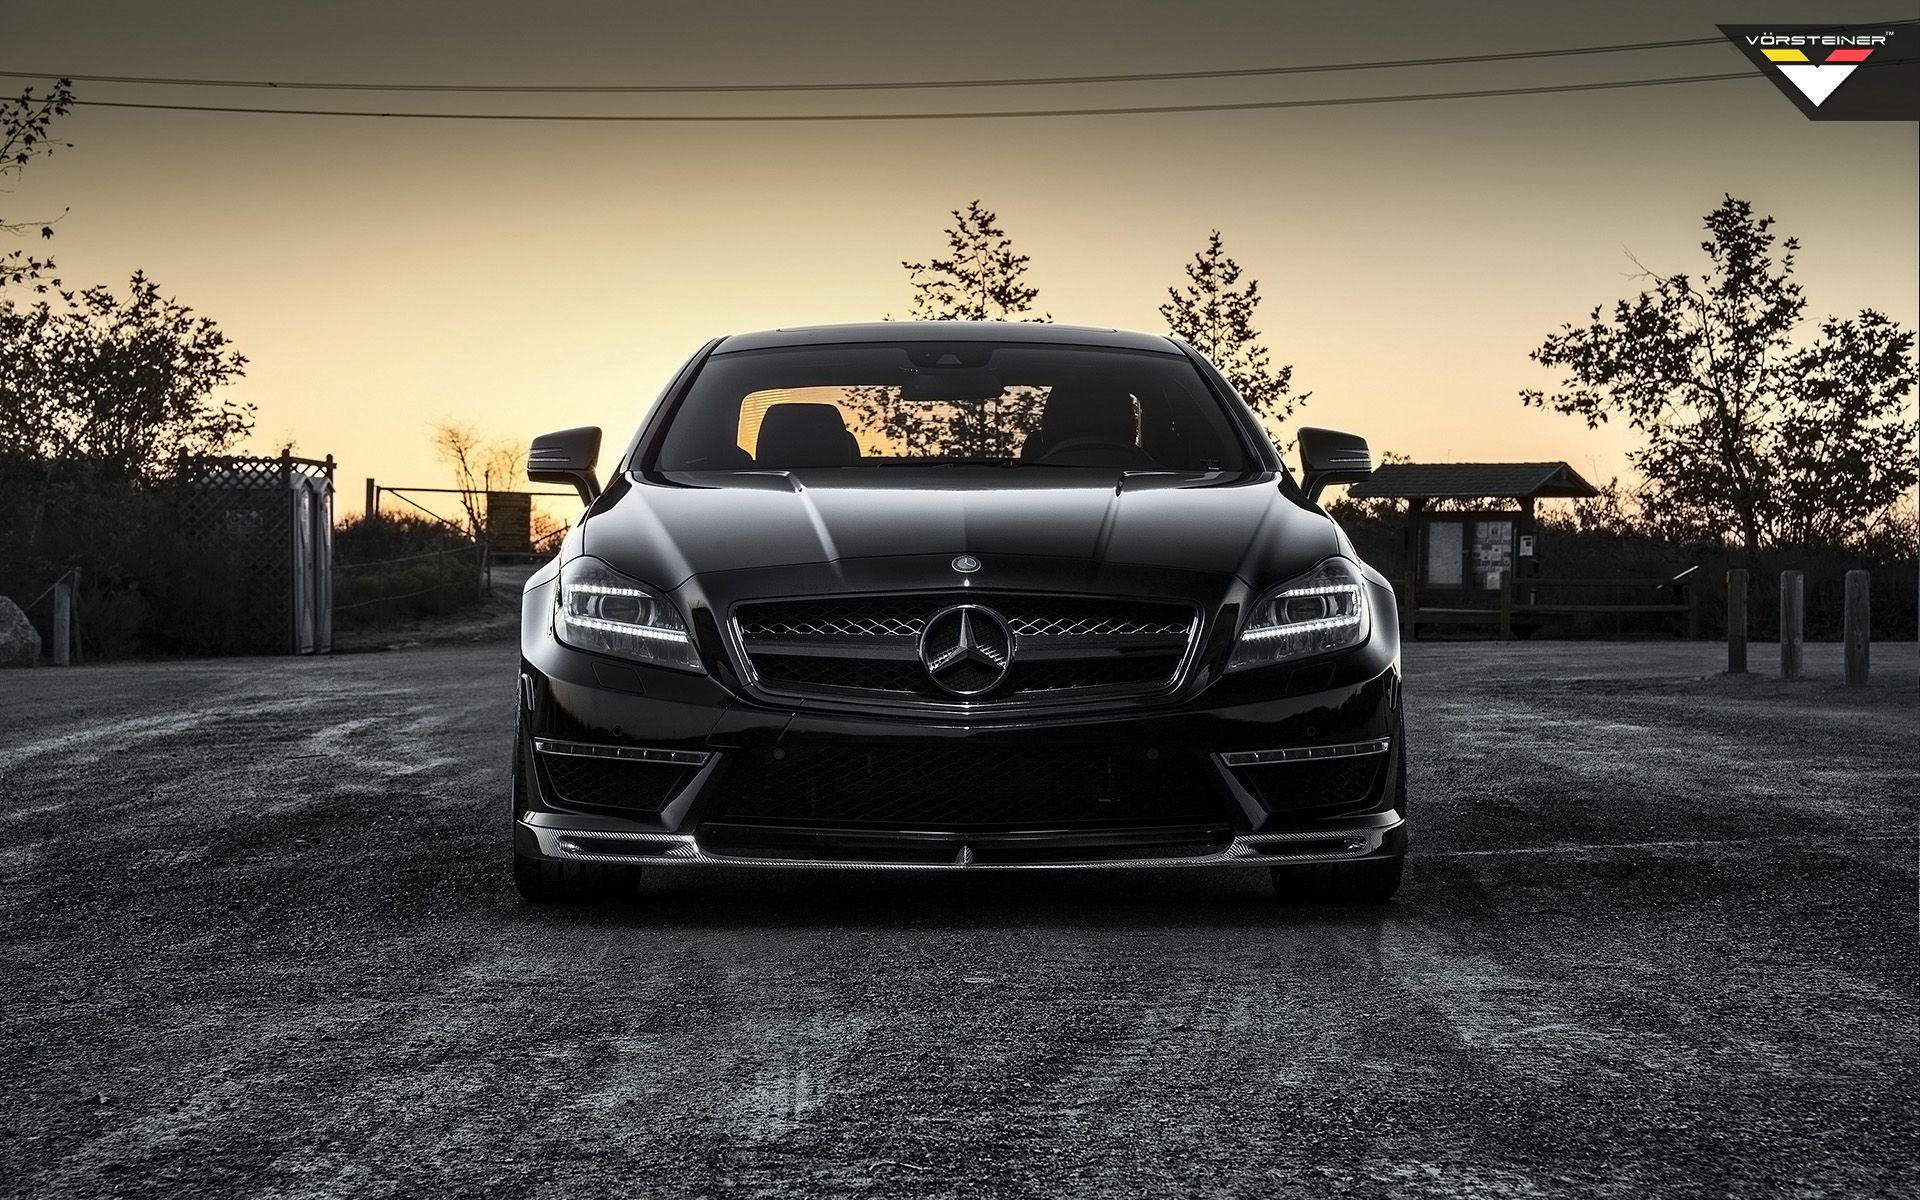 Mercedes Benz CLS 63 AMG Background Images and Wallpapers – YL Computing